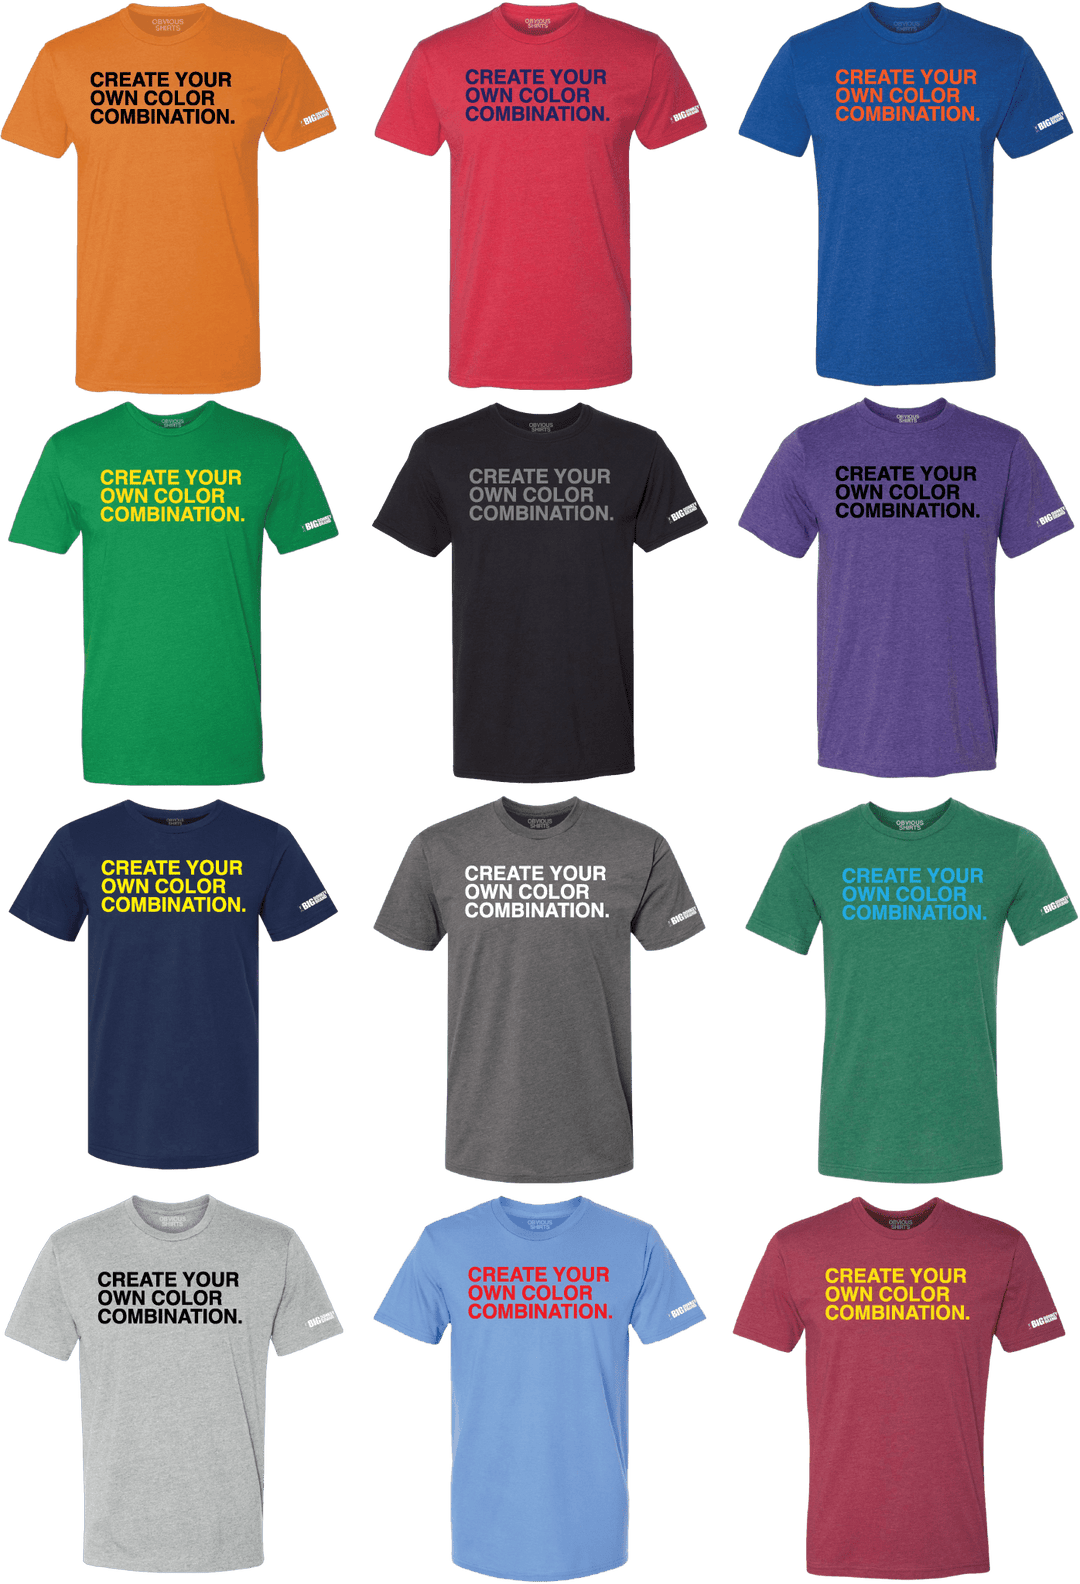 PITCHERS ARE ATHLETES. (CUSTOMIZE) - OBVIOUS SHIRTS